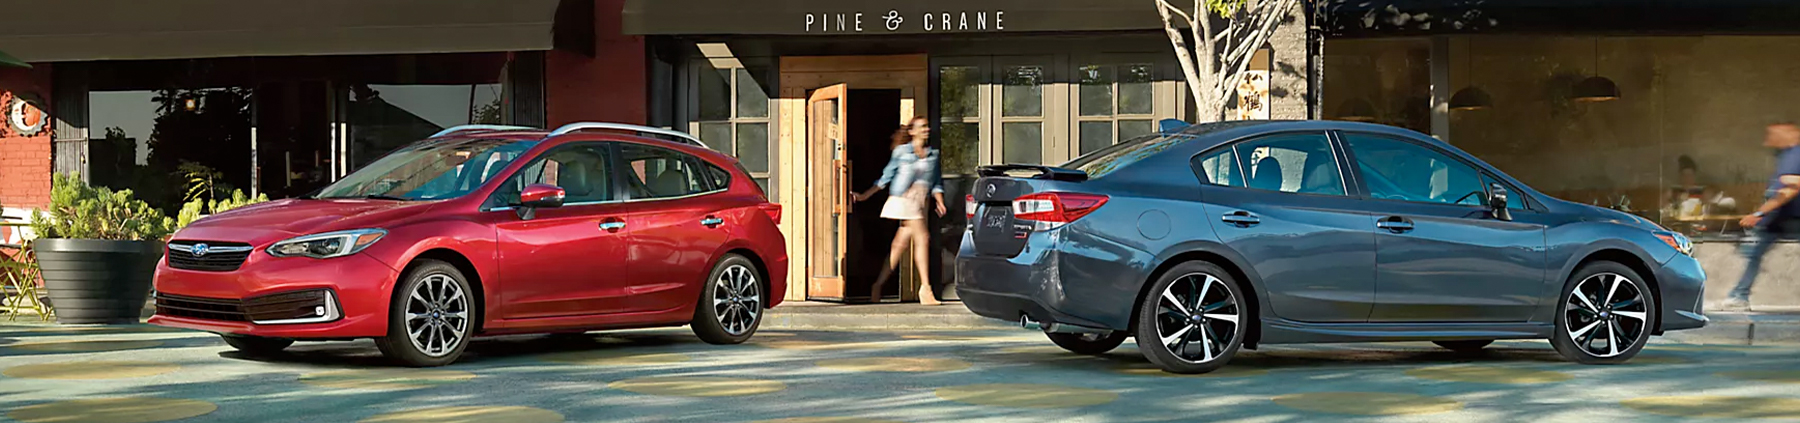 Limited 5-door shown in Crimson Red Pearl and Sport sedan shown in Magnetite Gray Metallic